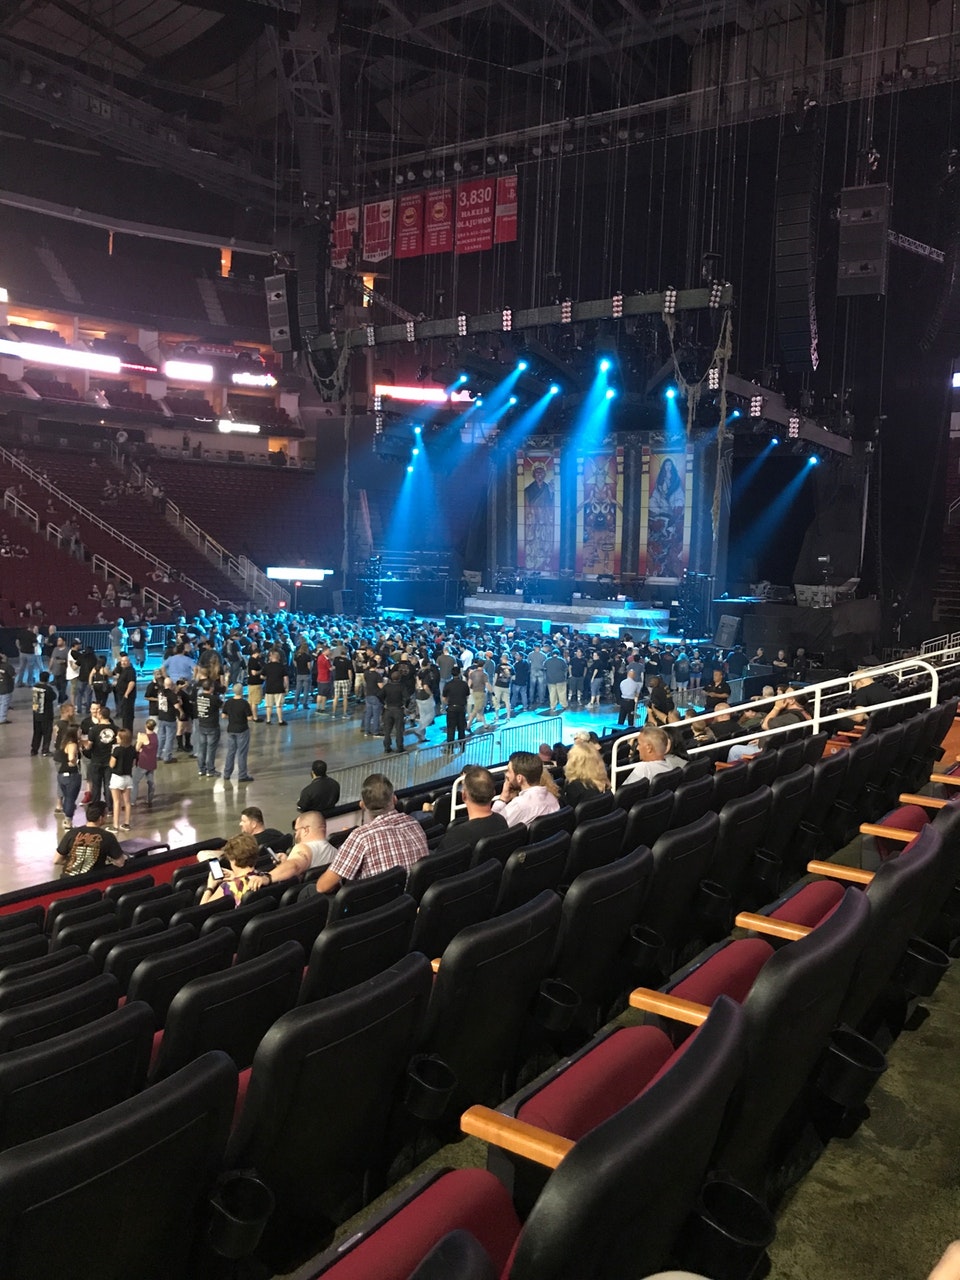 section 108, row 10 seat view  for concert - toyota center